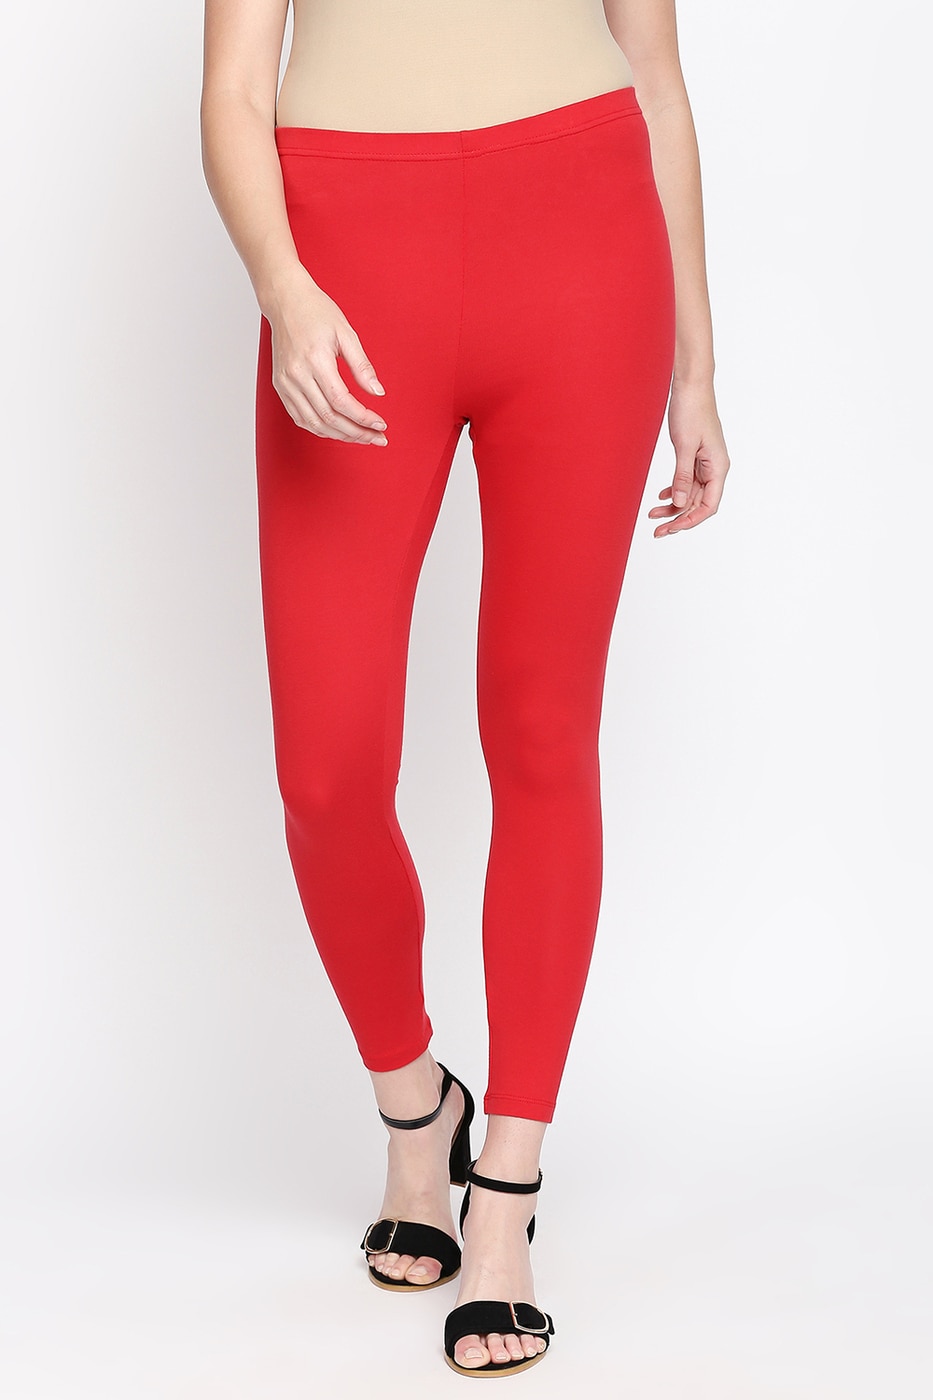 Rangmanch Women Solid Off White Leggings - Selling Fast at